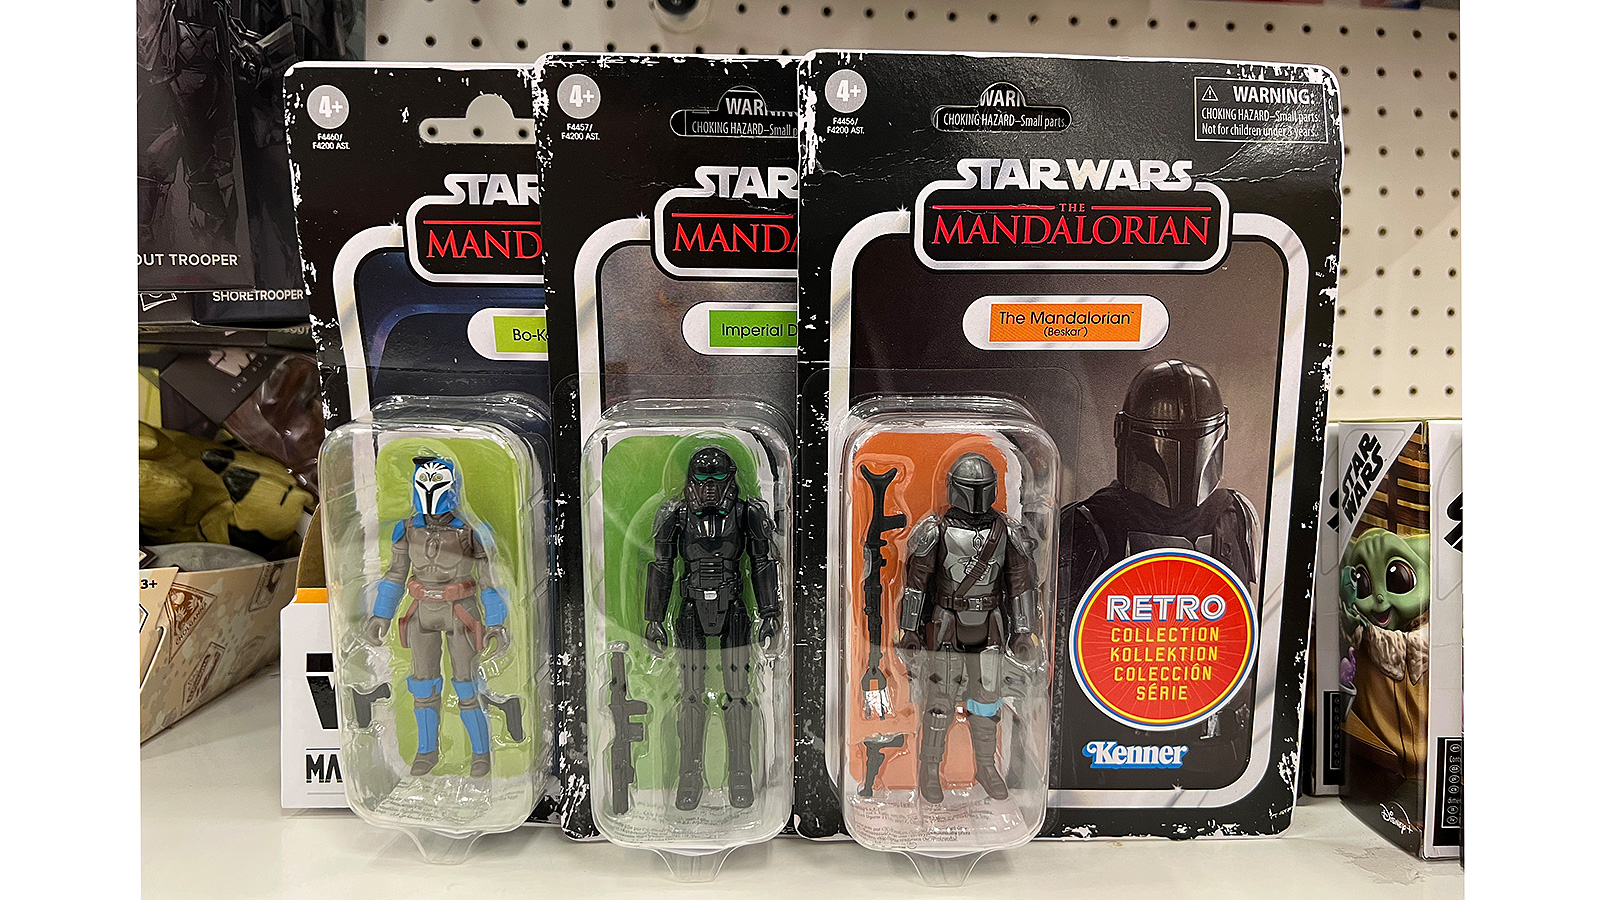 Found At Local Target And Walmart Stores - Retro Collection 3.75-Inch The Mandalorian Wave 2 Figures